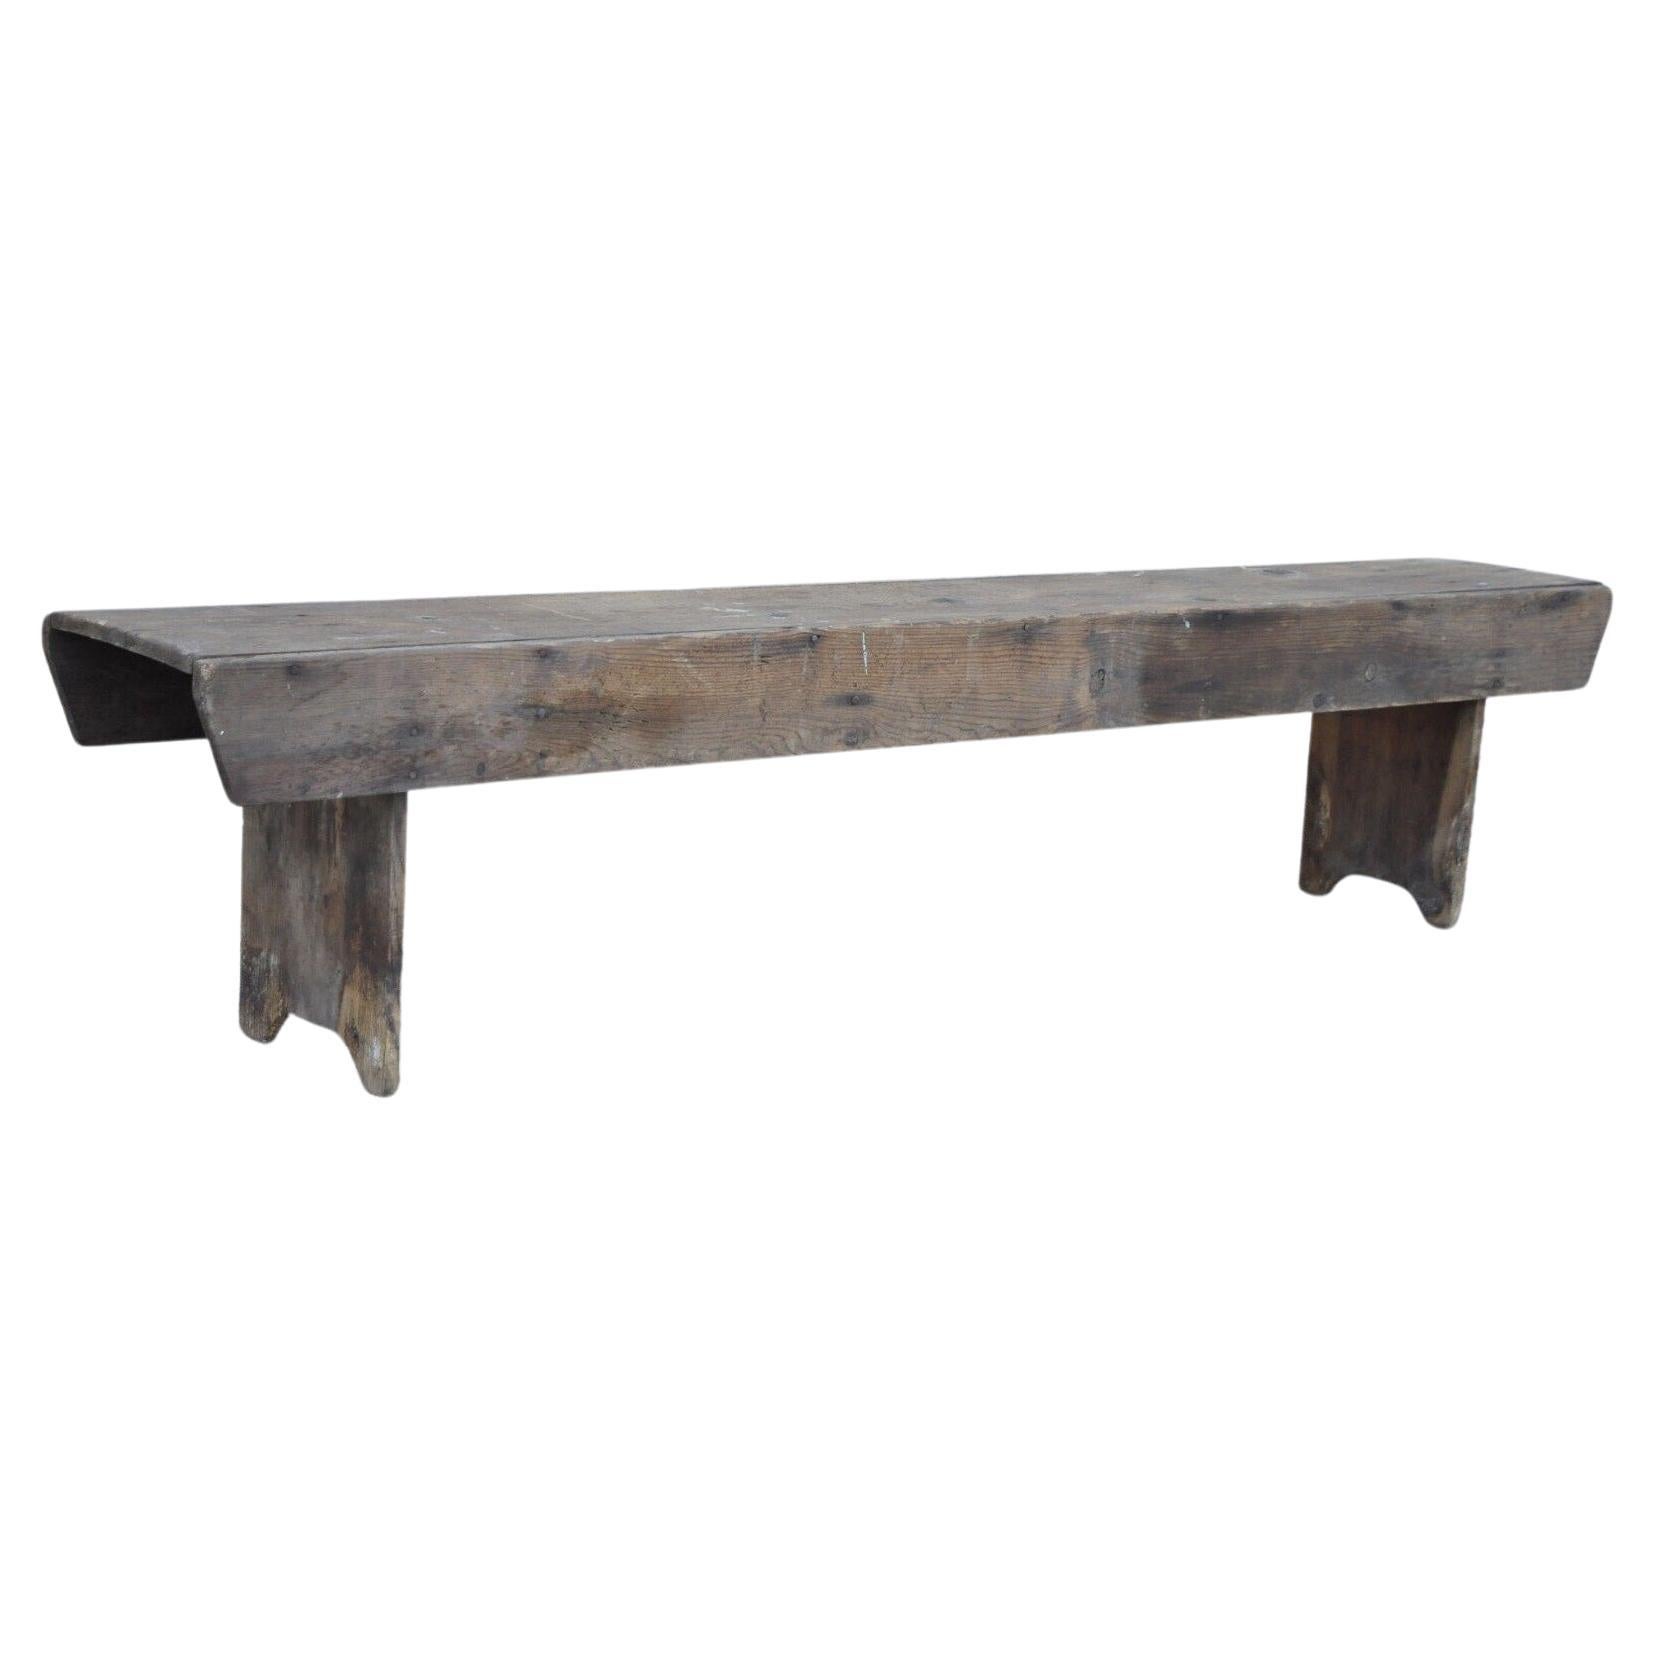 Antique French Country Primitive Distressed Wood Plank Bench